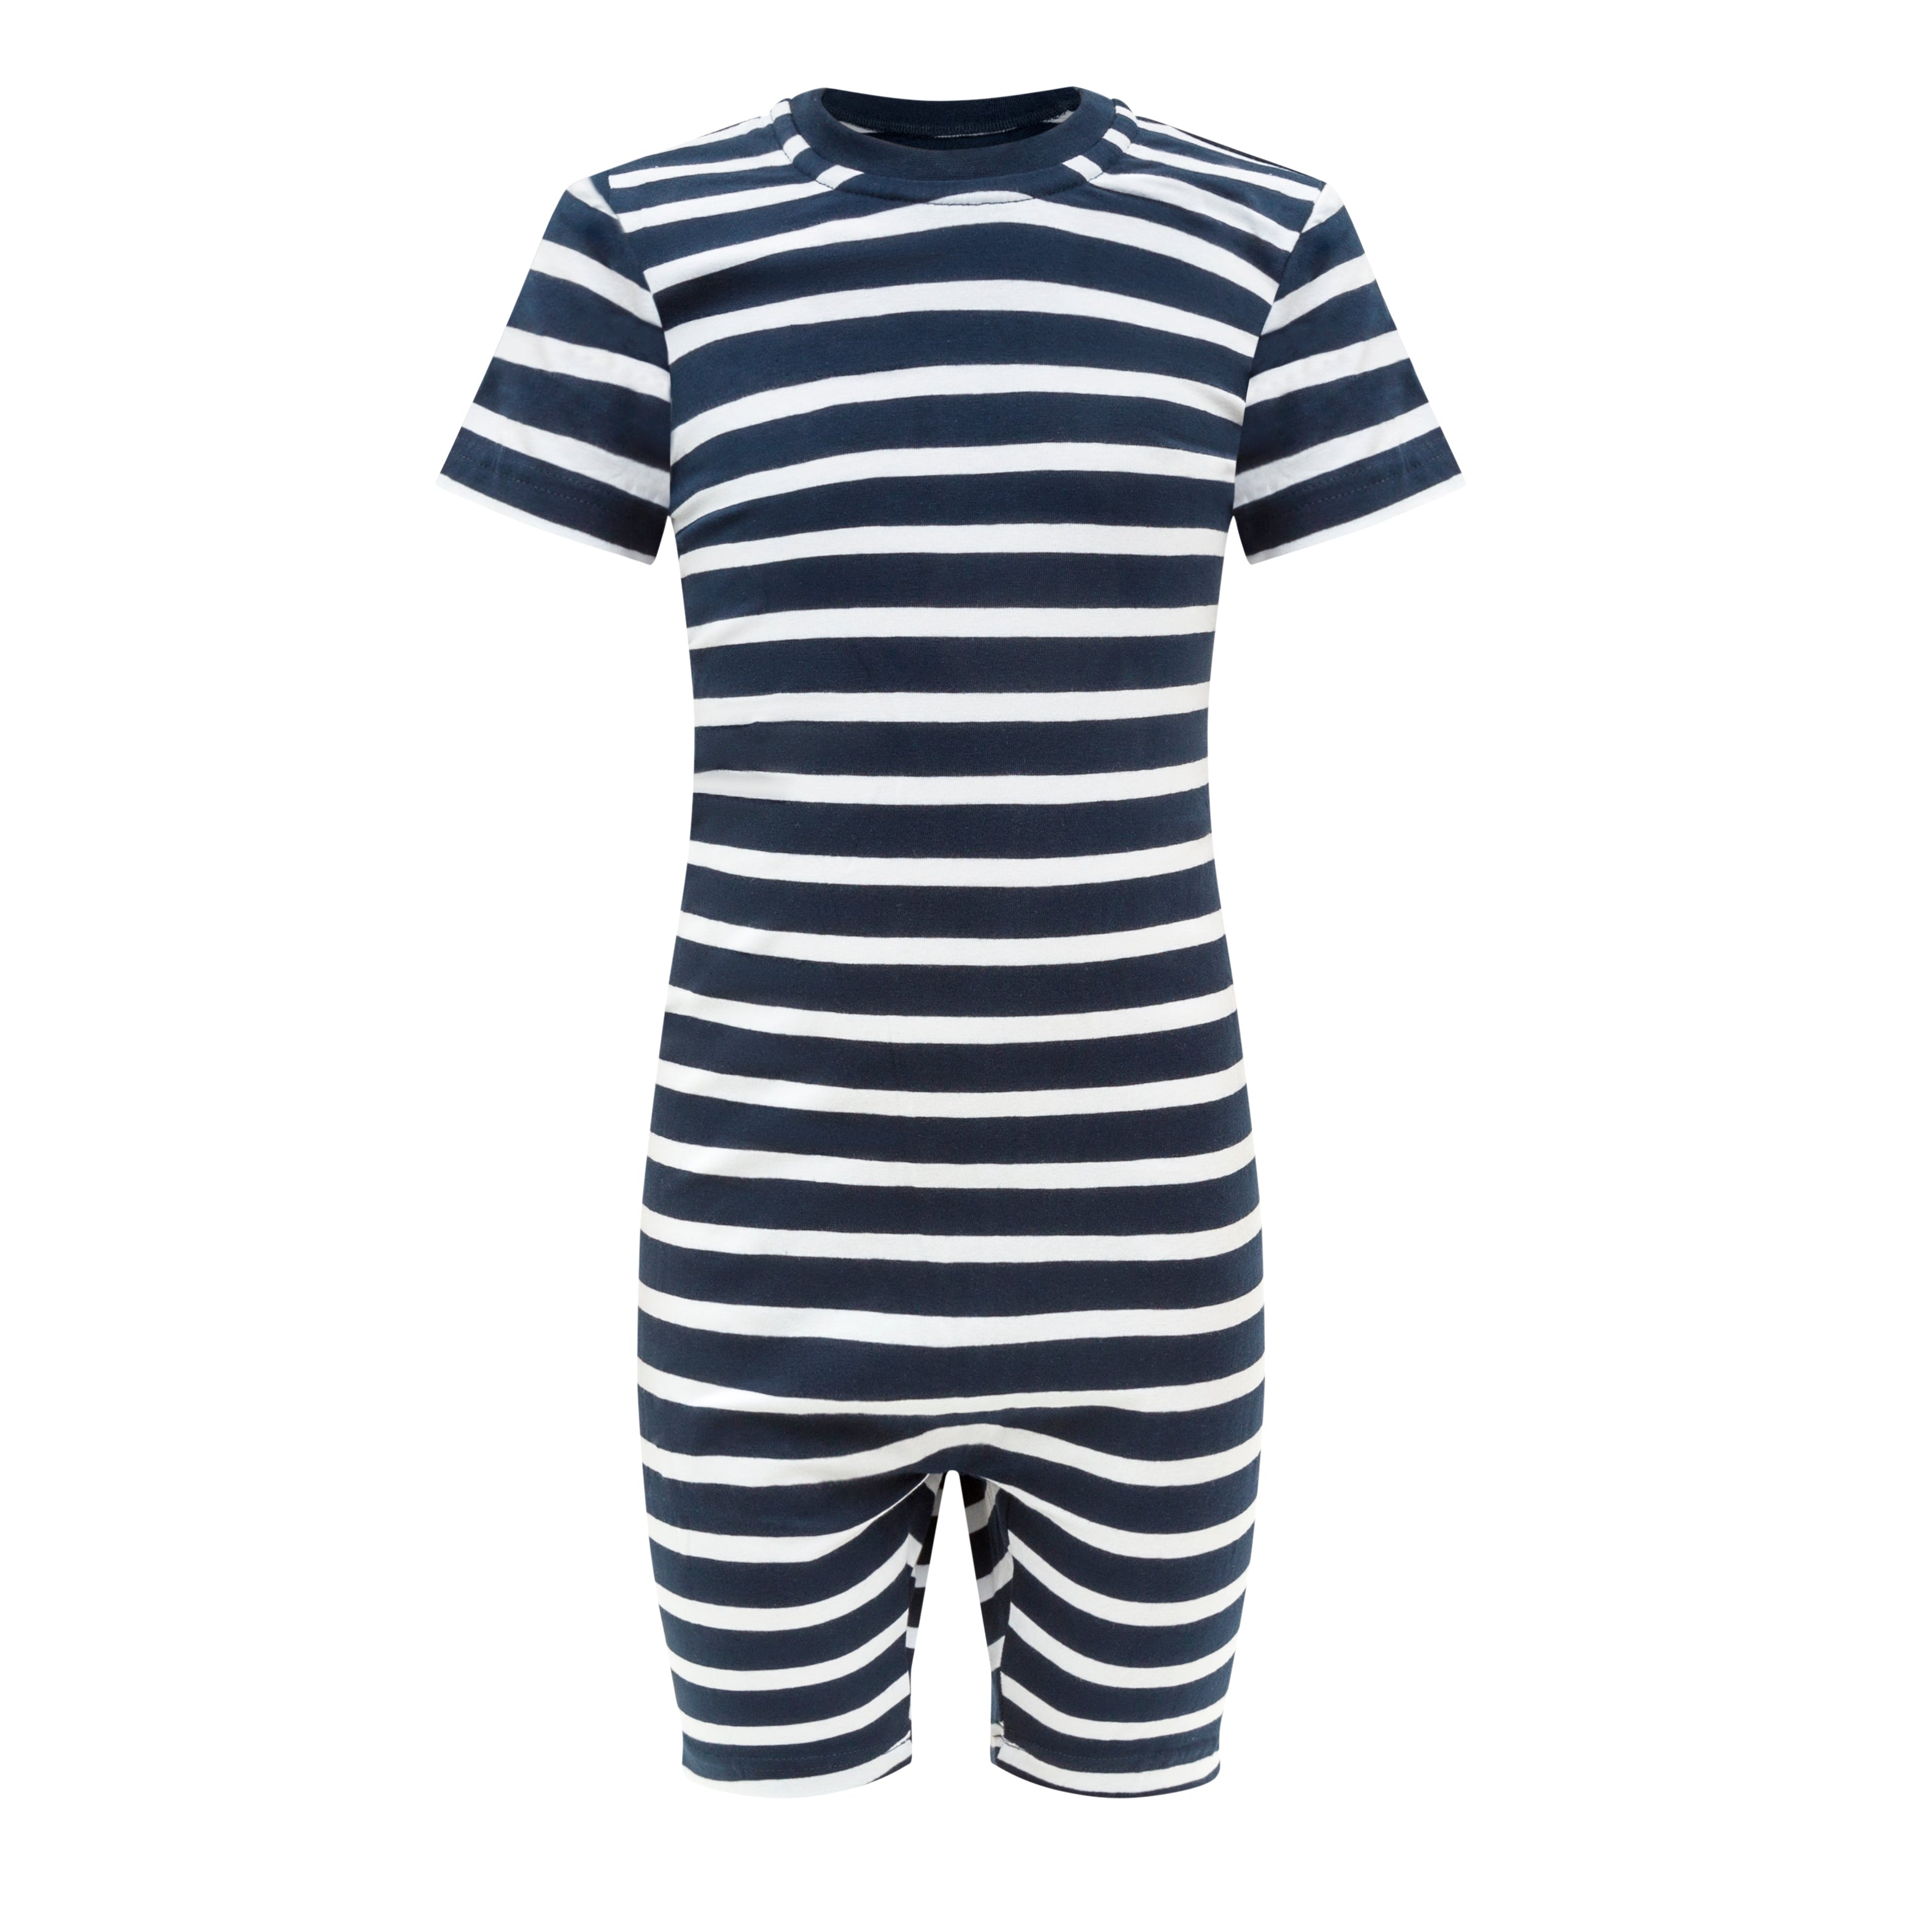 KayCey_Adaptive_clothing_for_kids_with_special_needs_Zip_Back_Short_Leg_navy_white_stripe_front